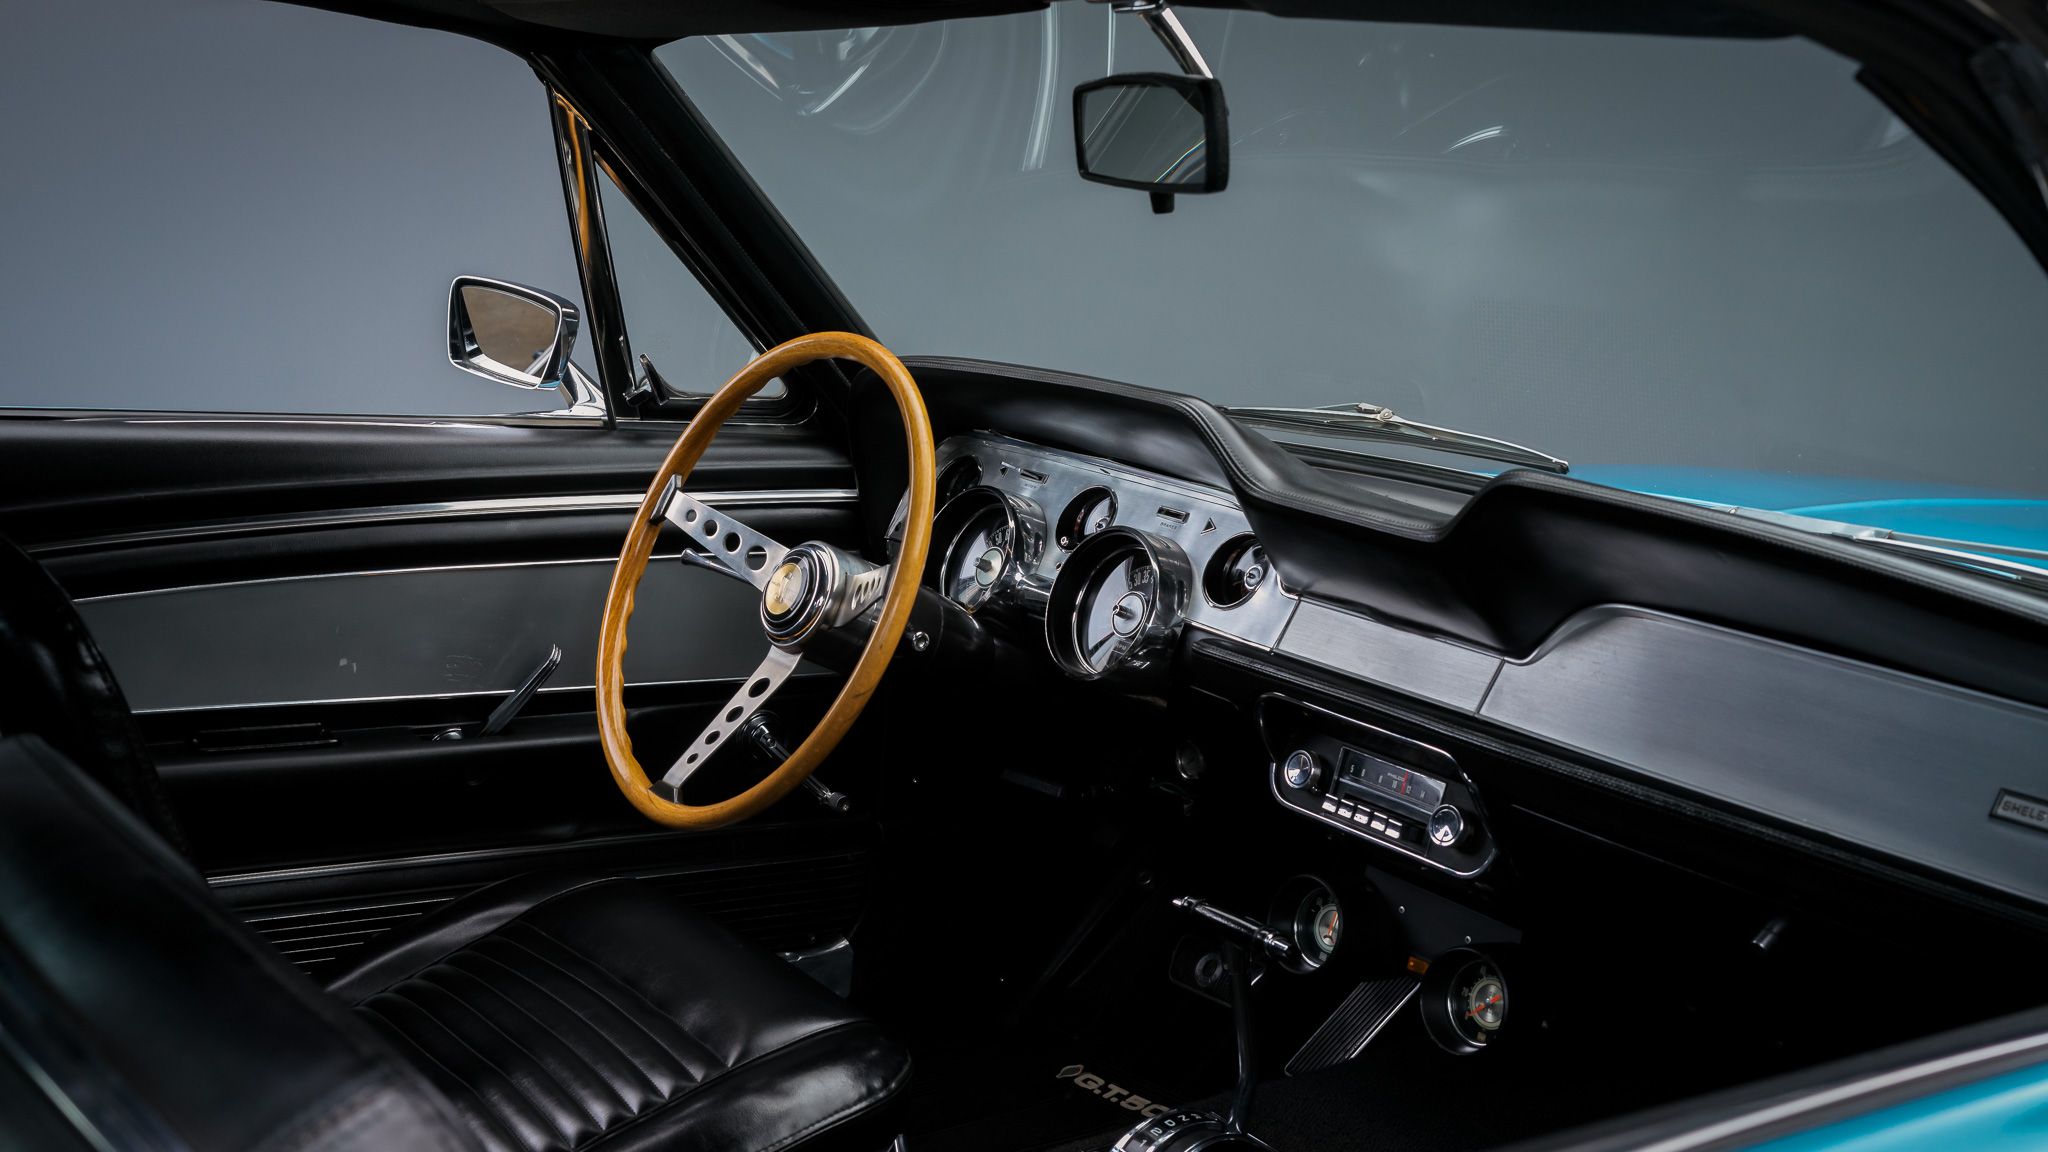 Interior photo of a 1967 Ford Mustang Shelby GT500 